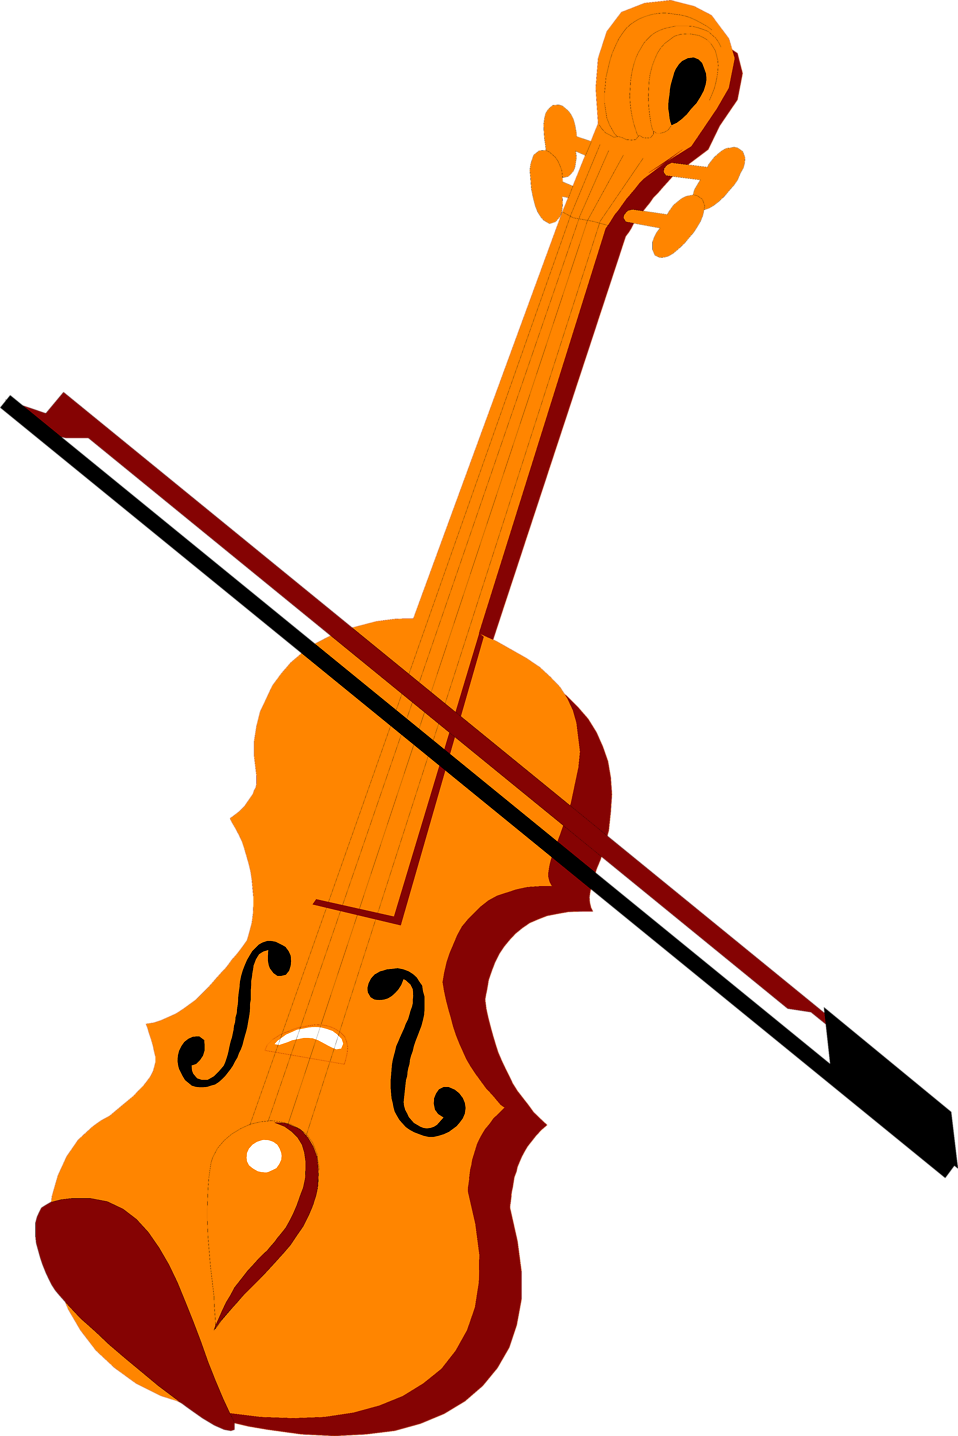 Fiddle Bow Clip Art Illustration Of A Violin And